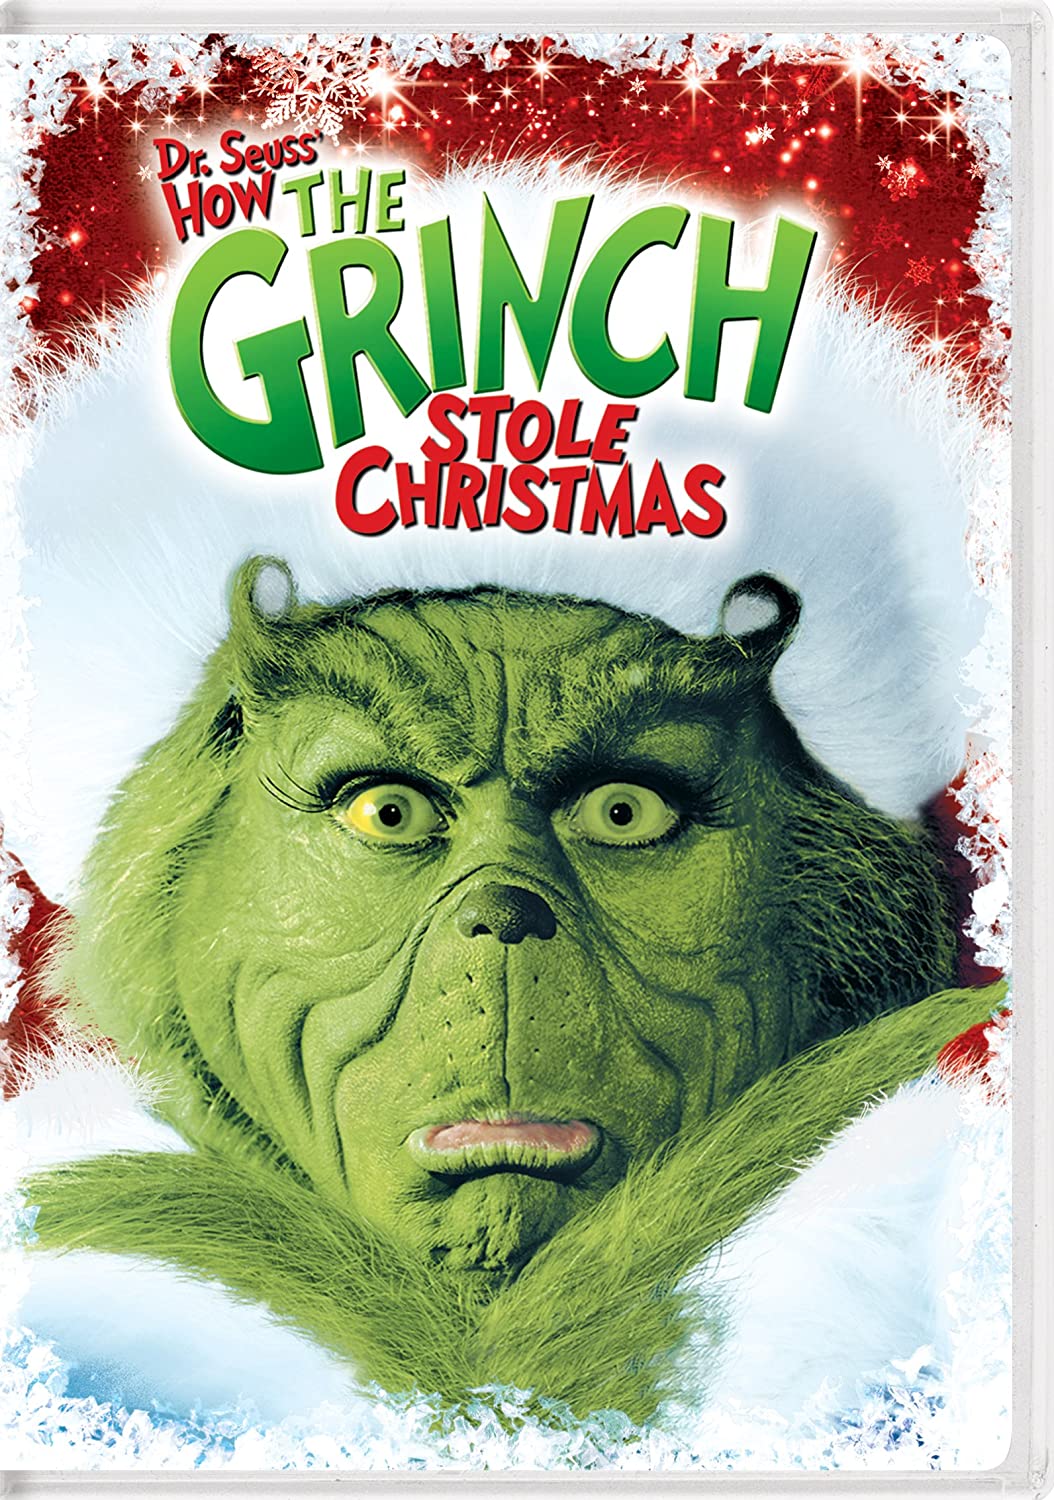 Dr. Seuss' How the Grinch Stole Christmas (2000) starring Jim Carrey,